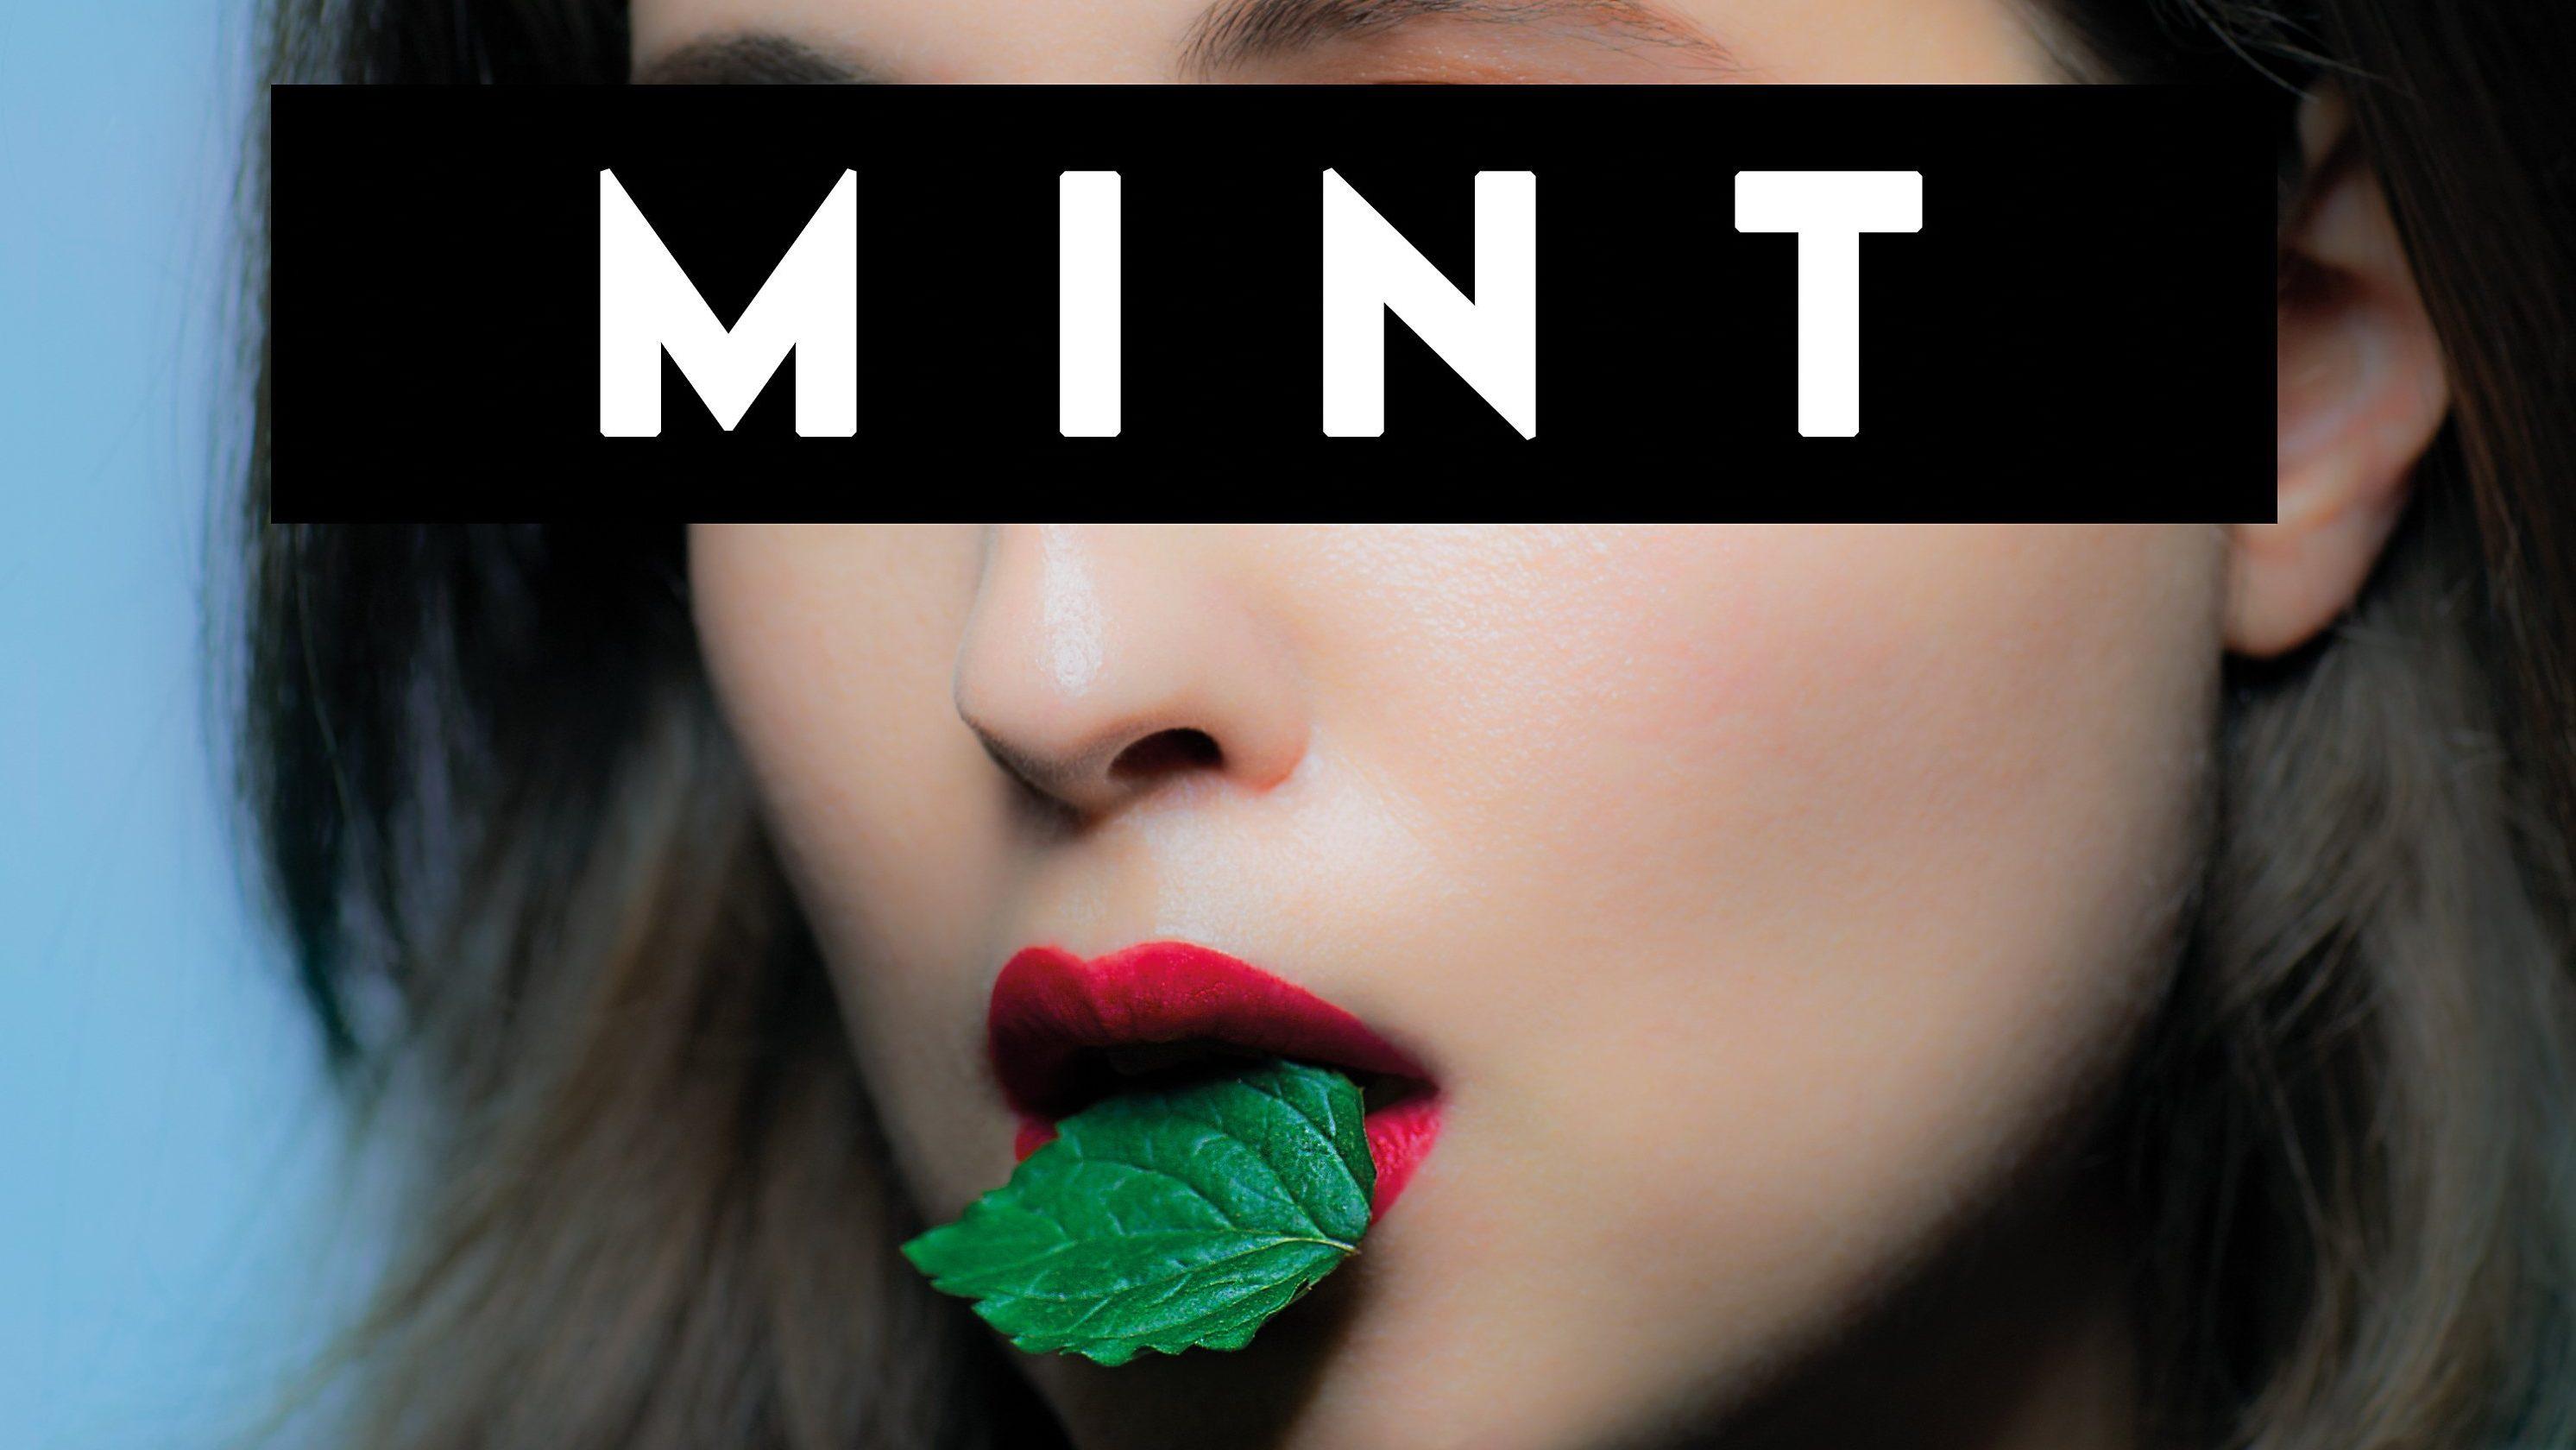 Alice Mertons debut album, Mint is lackluster and brings nothing new to Mertons sound. 